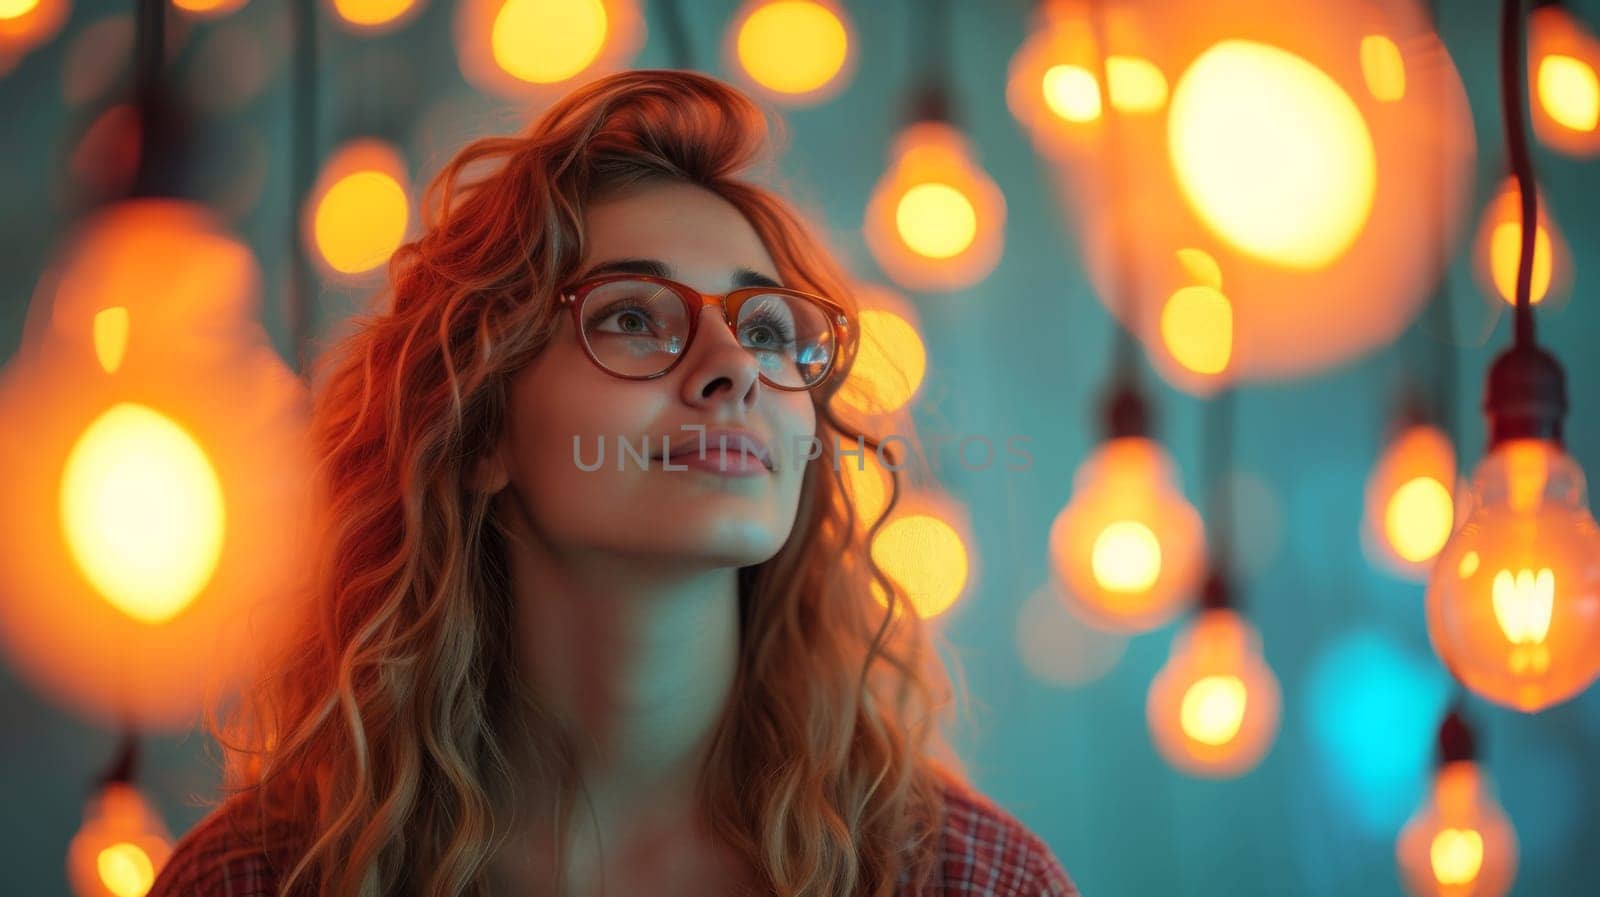 A woman with glasses looking up at a bunch of lights